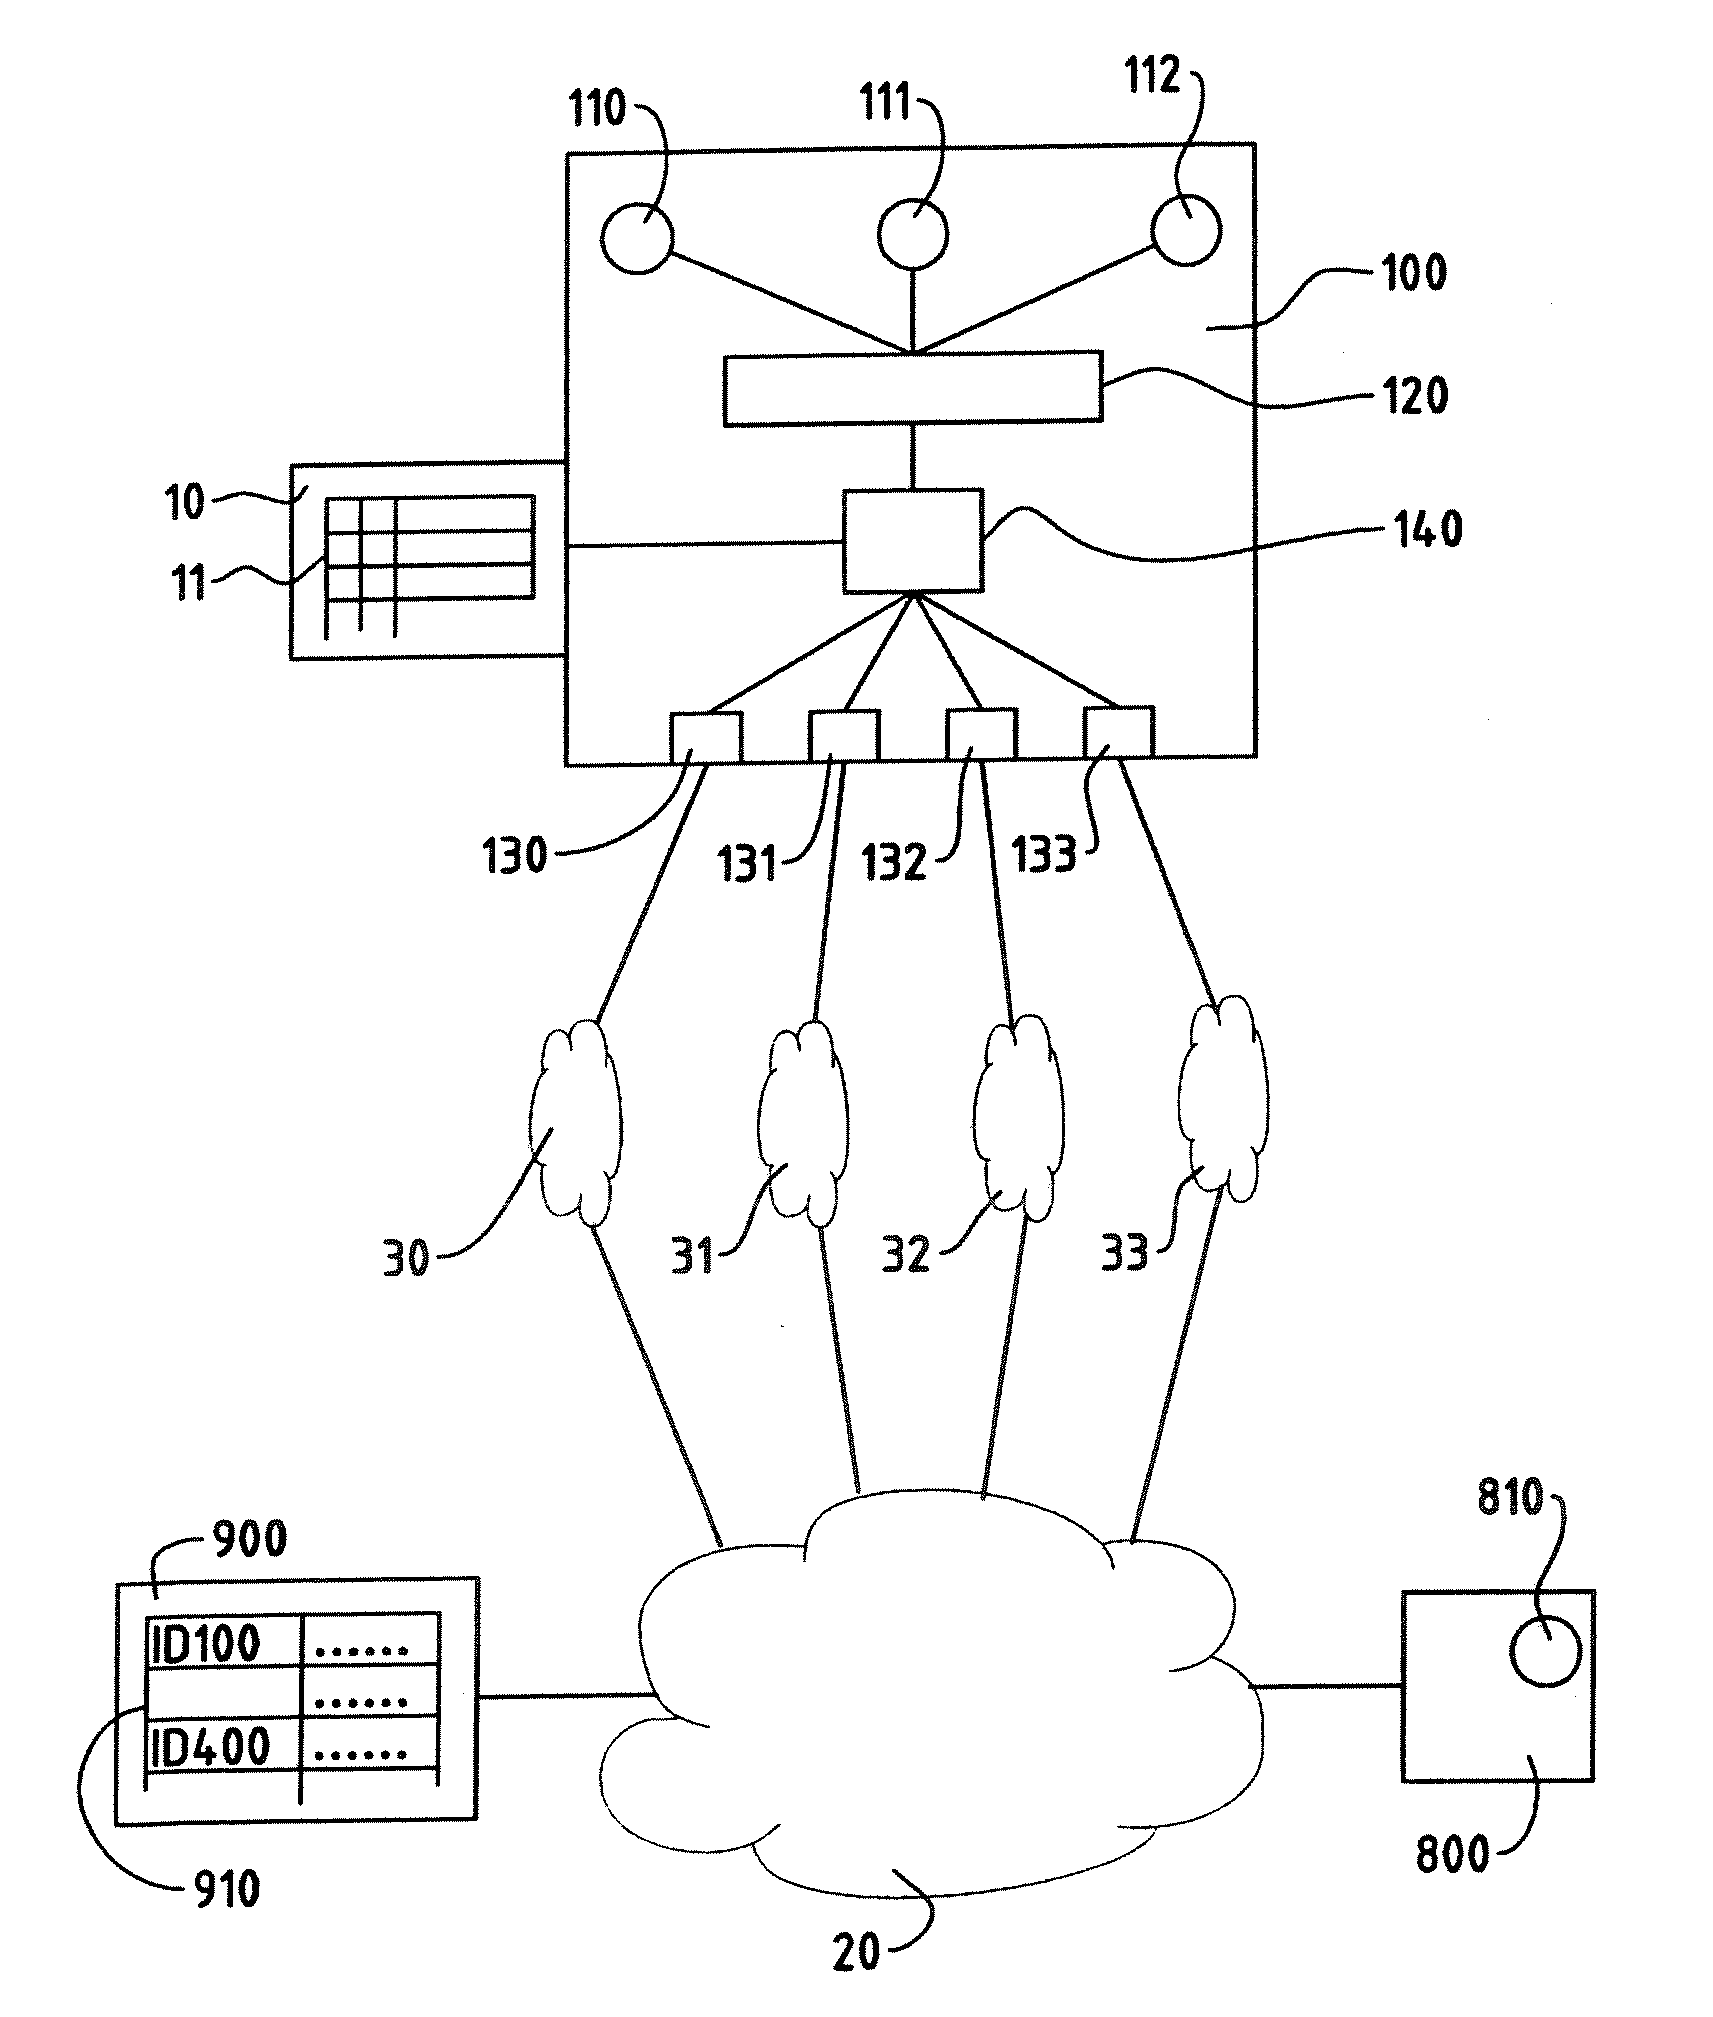 Method and system for a communication node with a plurality of network interfaces